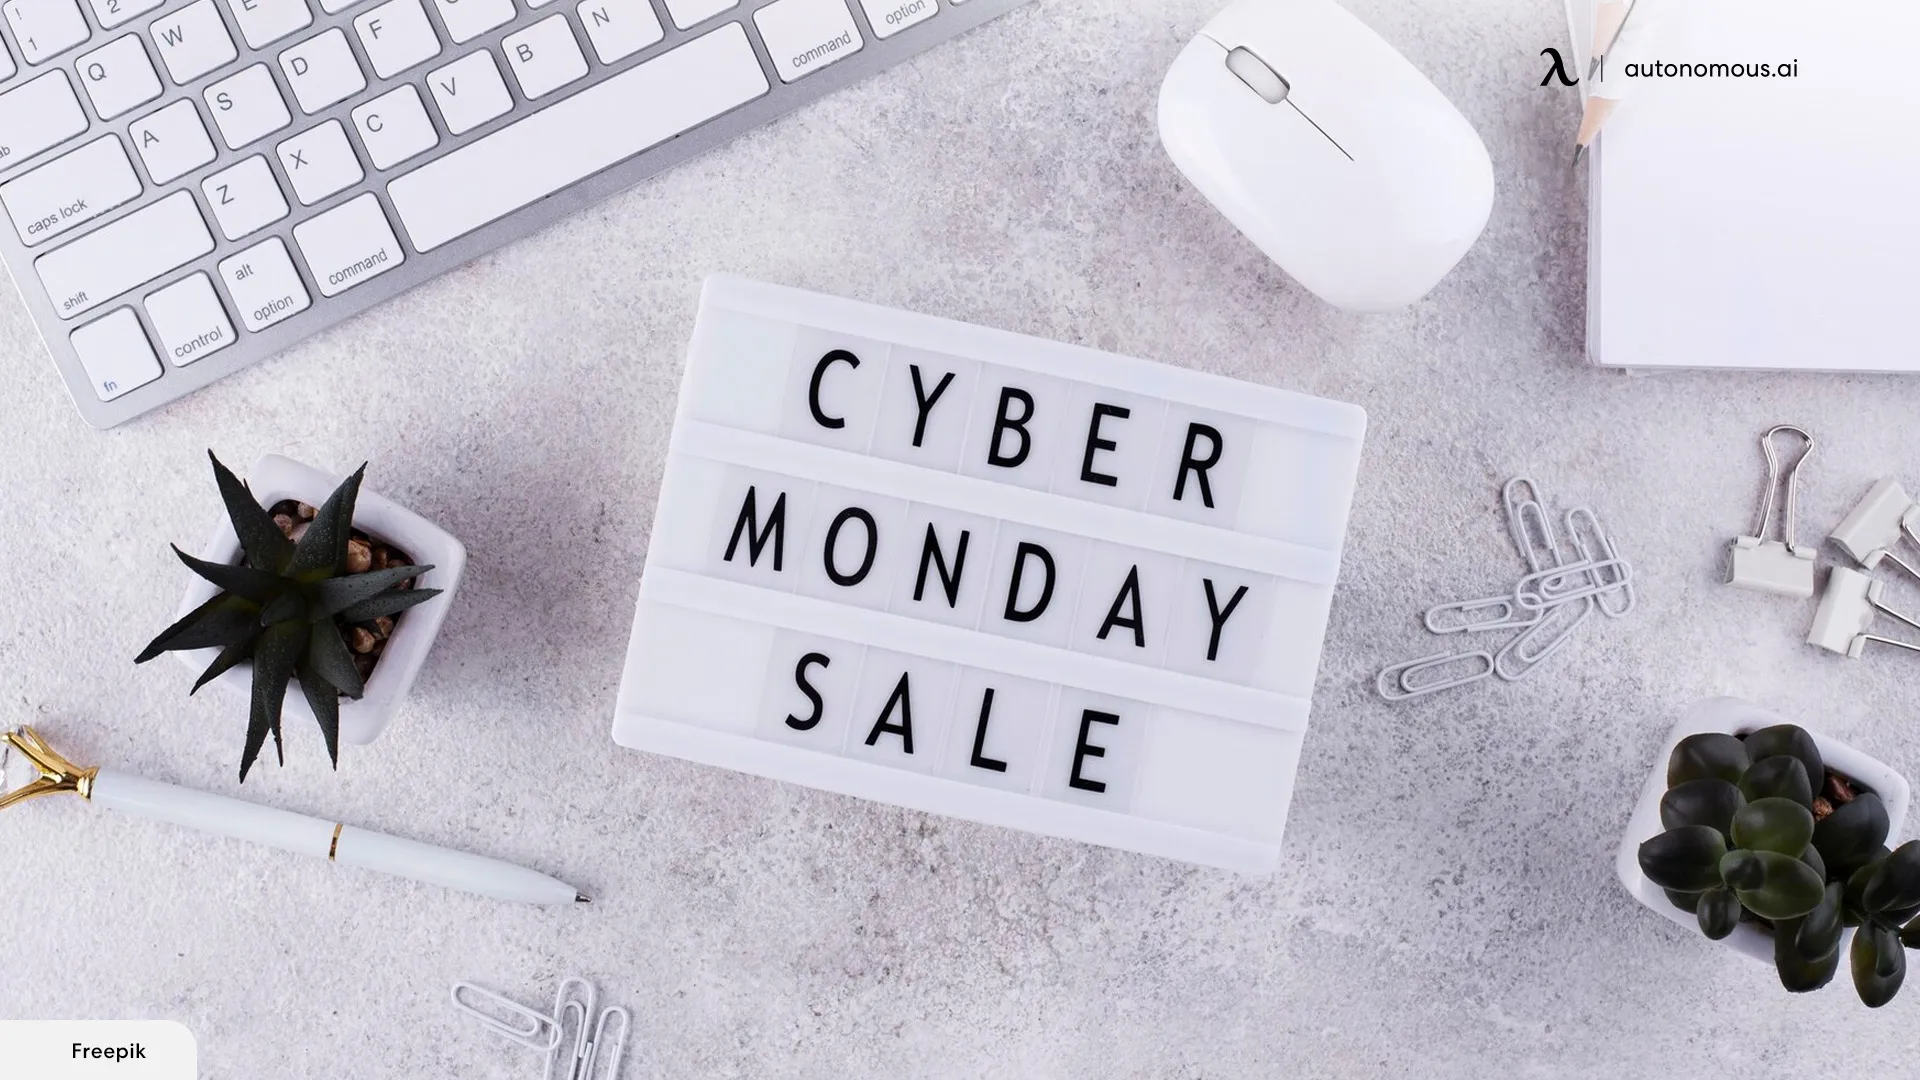 When is Cyber Monday?